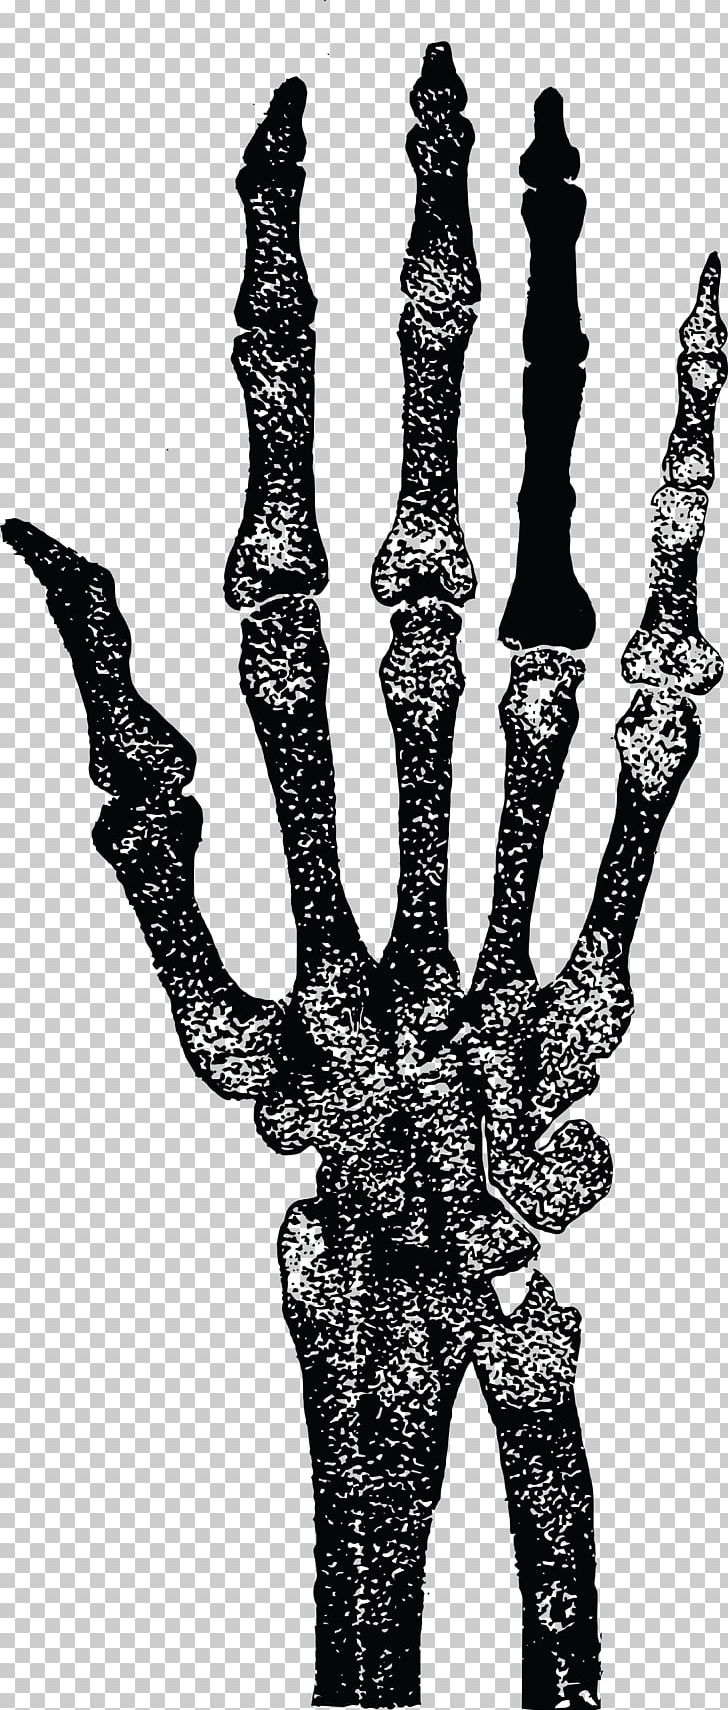 Human Skeleton Finger Hand Human Anatomy PNG, Clipart, Anatomy, Black And White, Bone, Elbow, Fantasy Free PNG Download